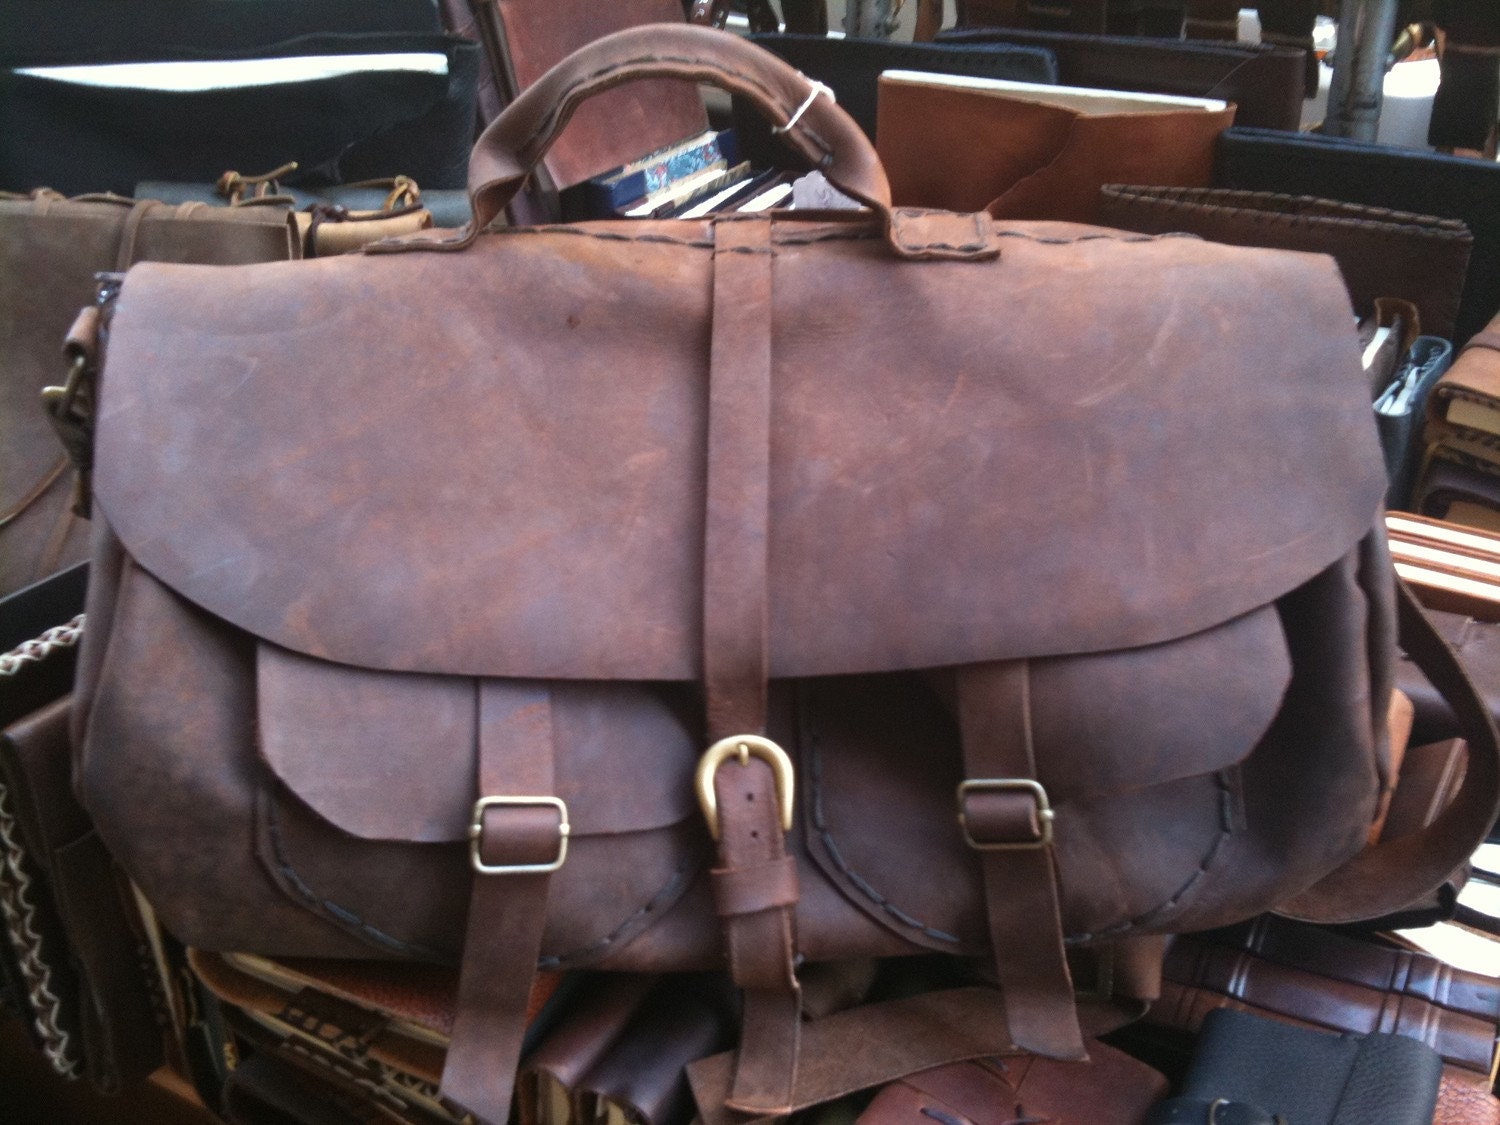 Leather cabin bag - tough leather travel bag sports gym holdall outdoor travel bag - hand sewn by Aixa - LUSCIOUSLEATHERNYC